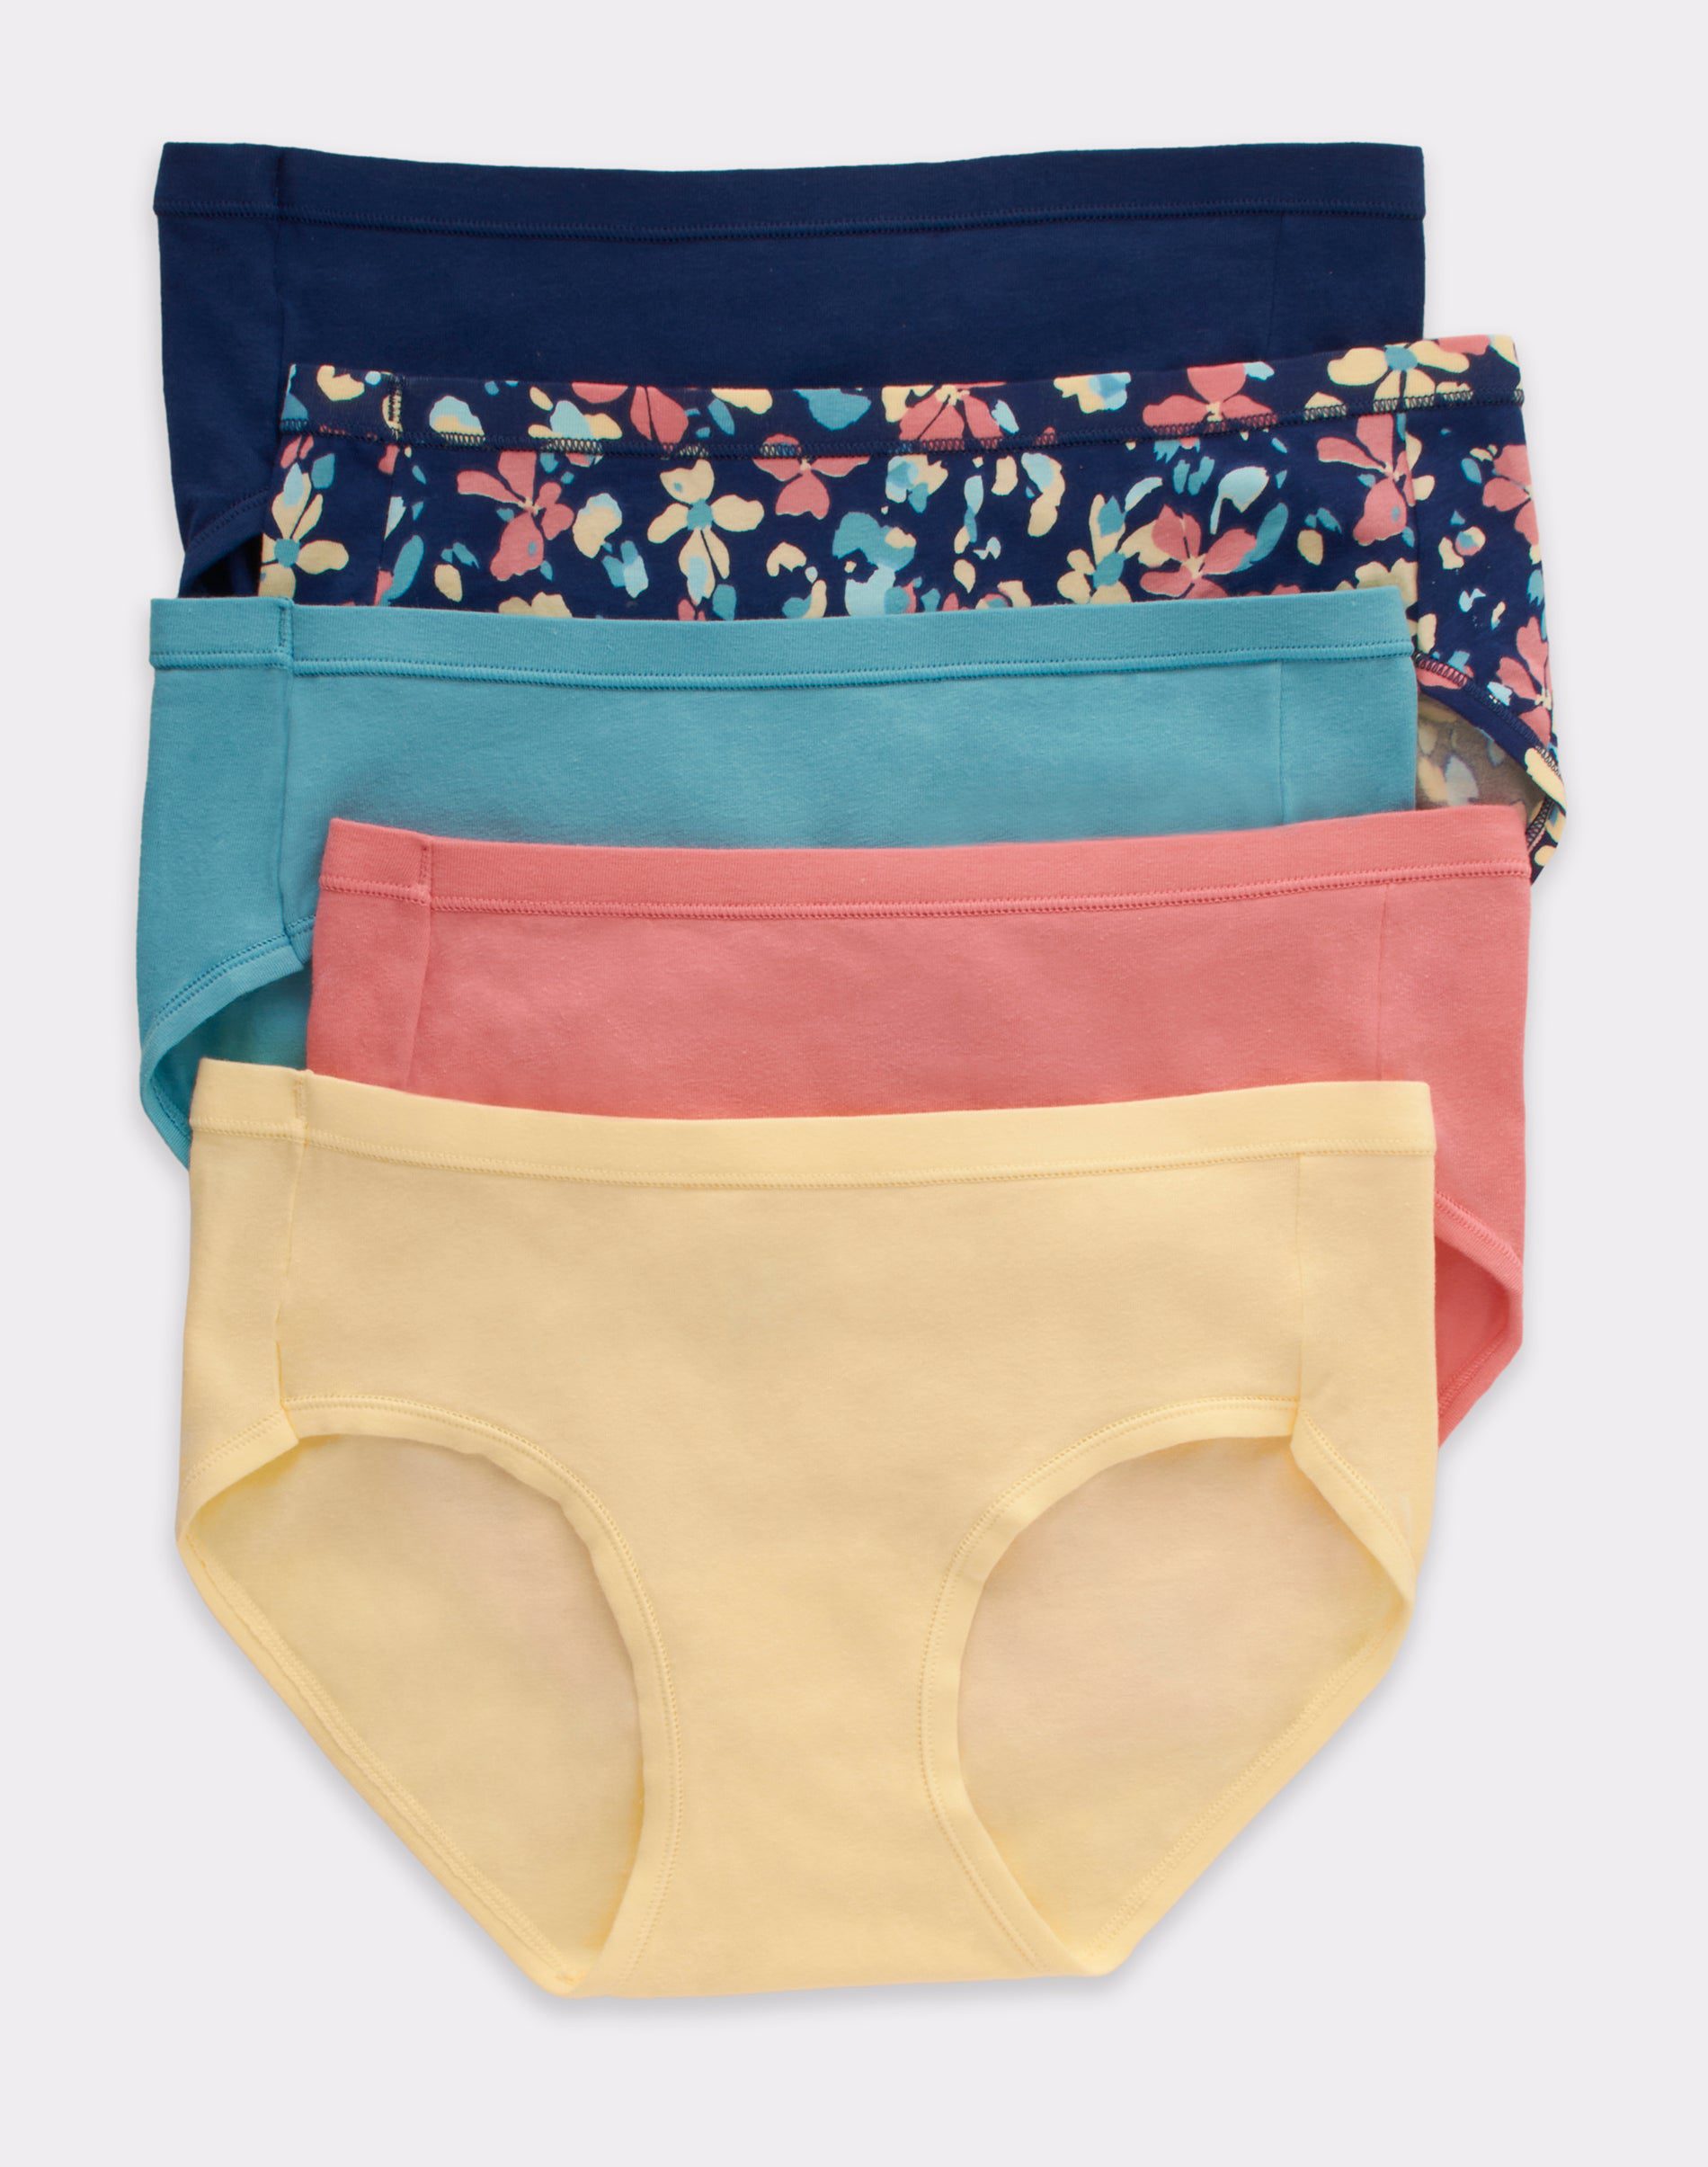 Hanes Ultimate Cotton Women's Hipster Panties 5-Pack 